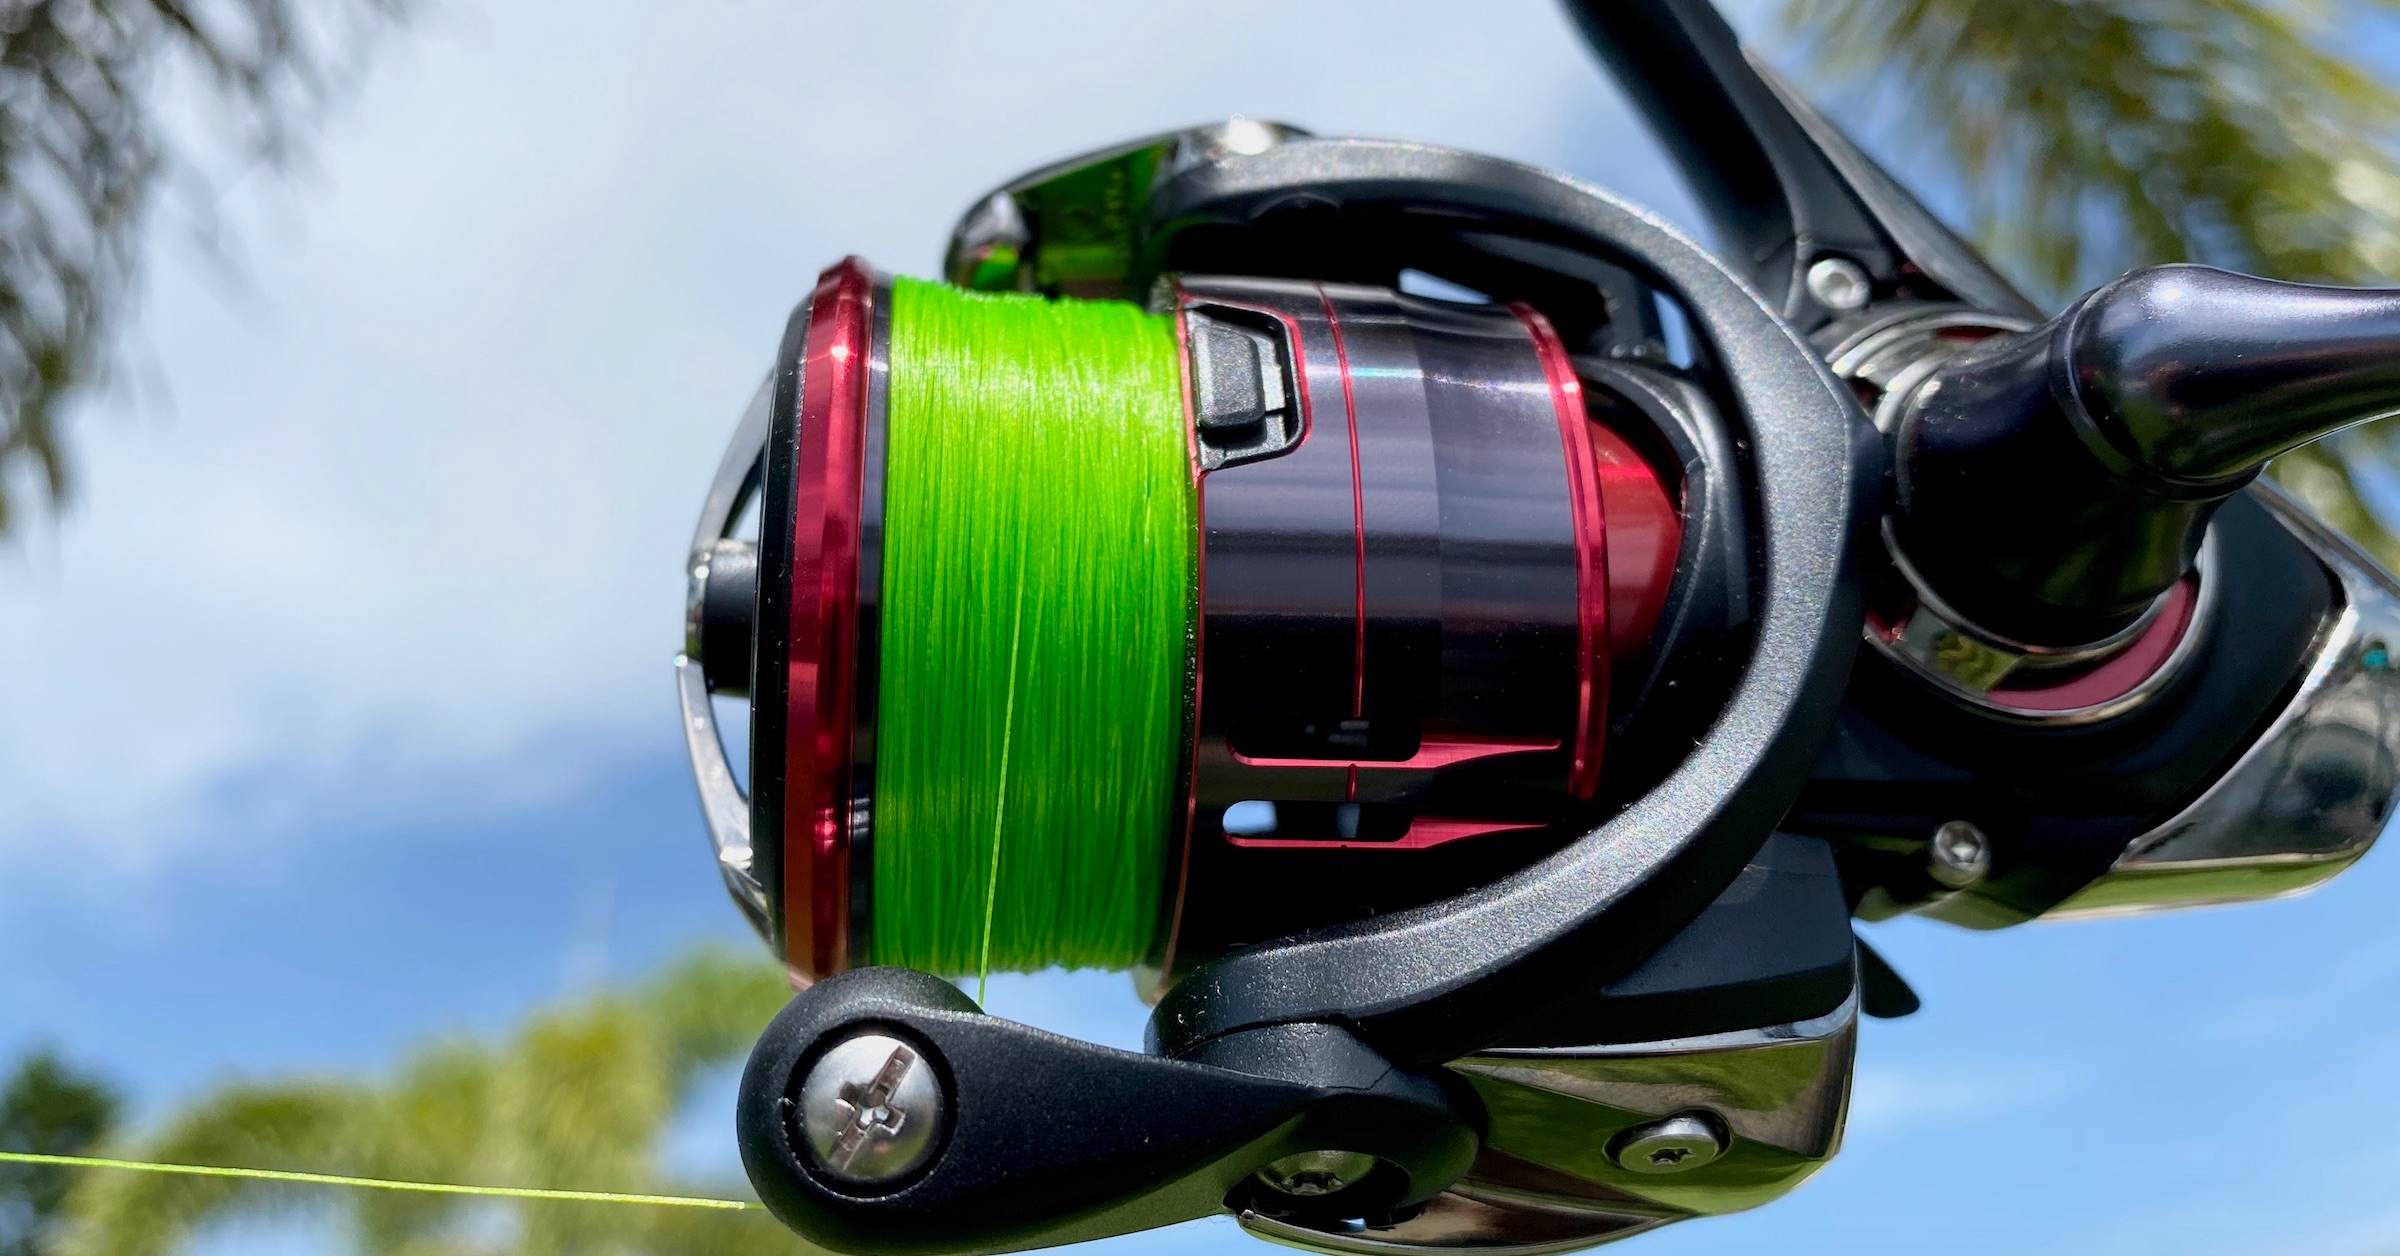 How to Spool a Spinning Reel? 